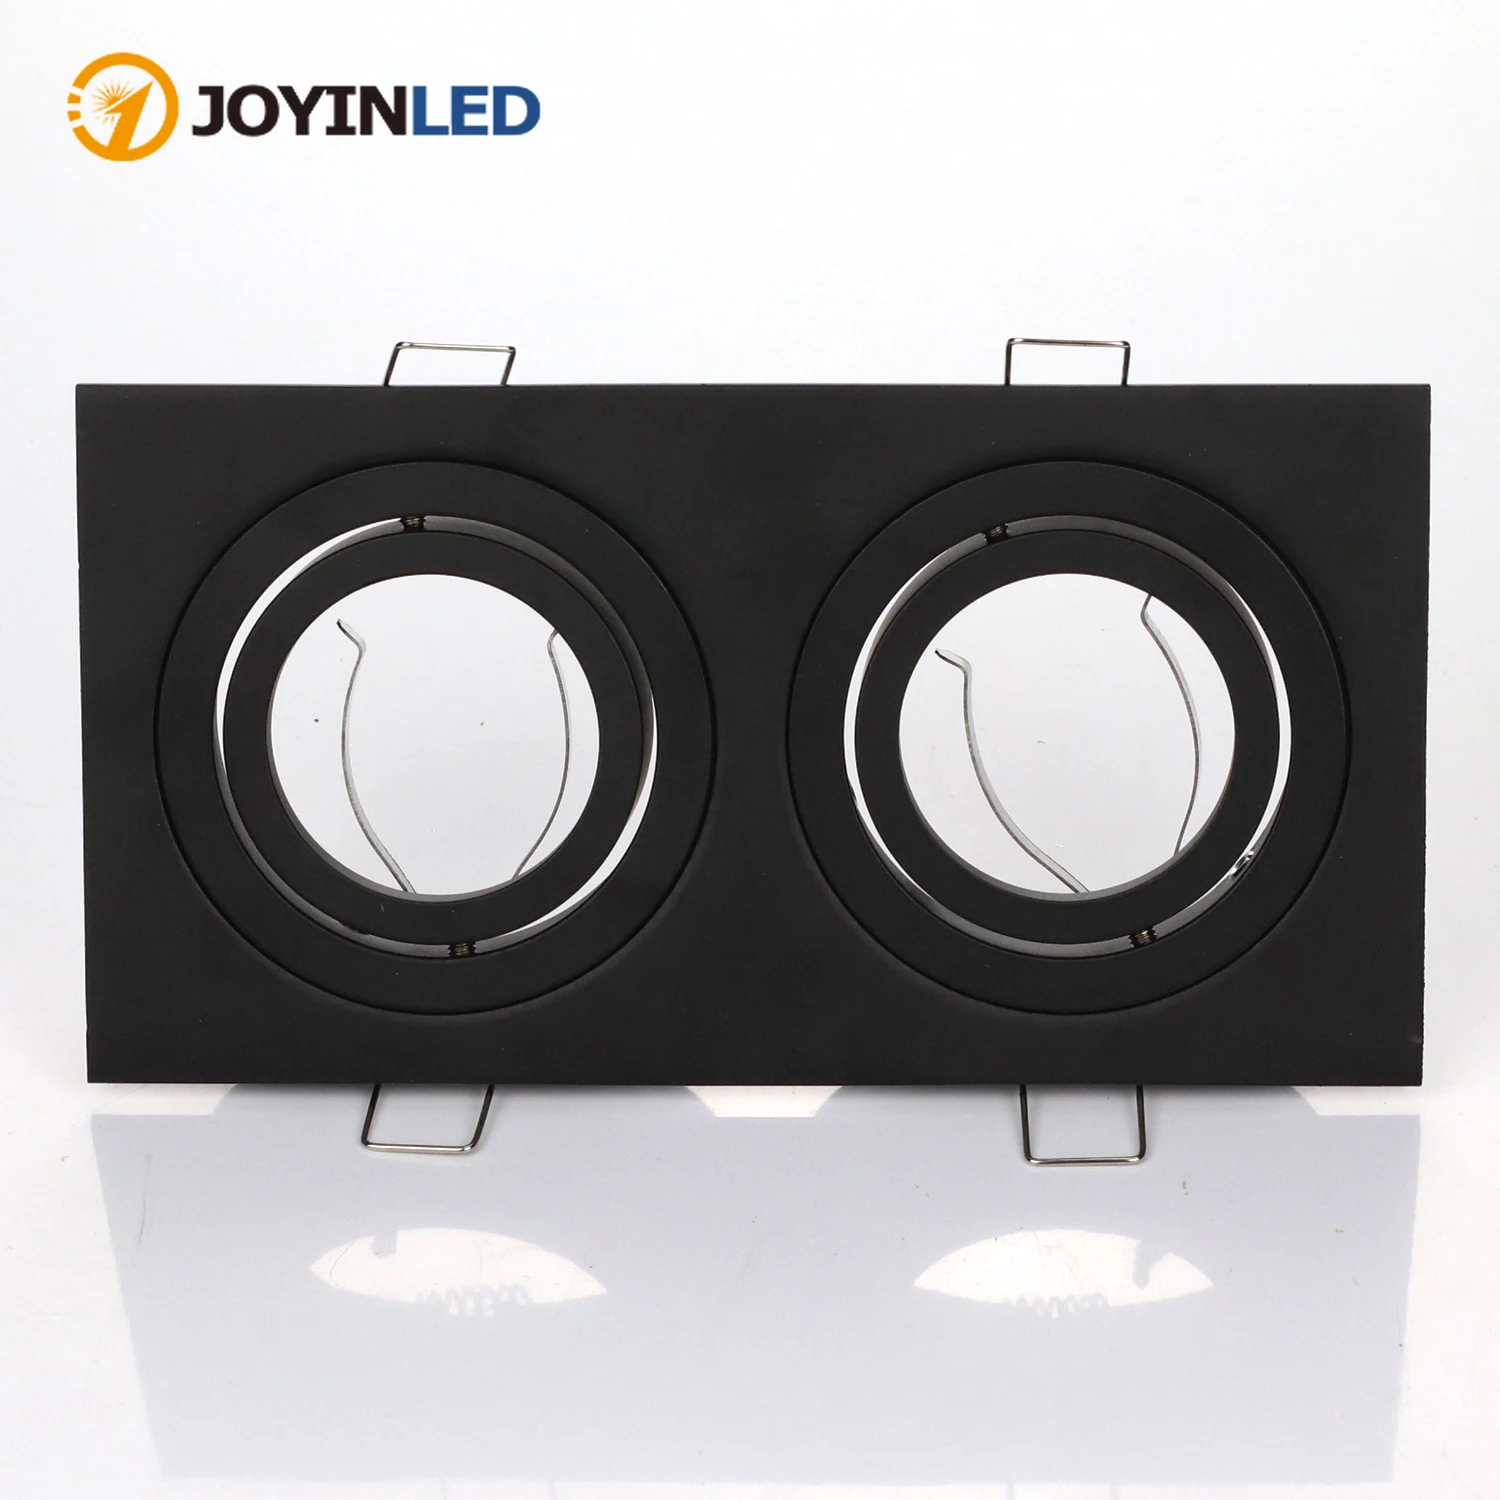 

Square Double Head Ceiling Lights Fixtures GU10 MR16 Recessed Led Lighting Downlights Cut Out 155*85mm Fixture Frame